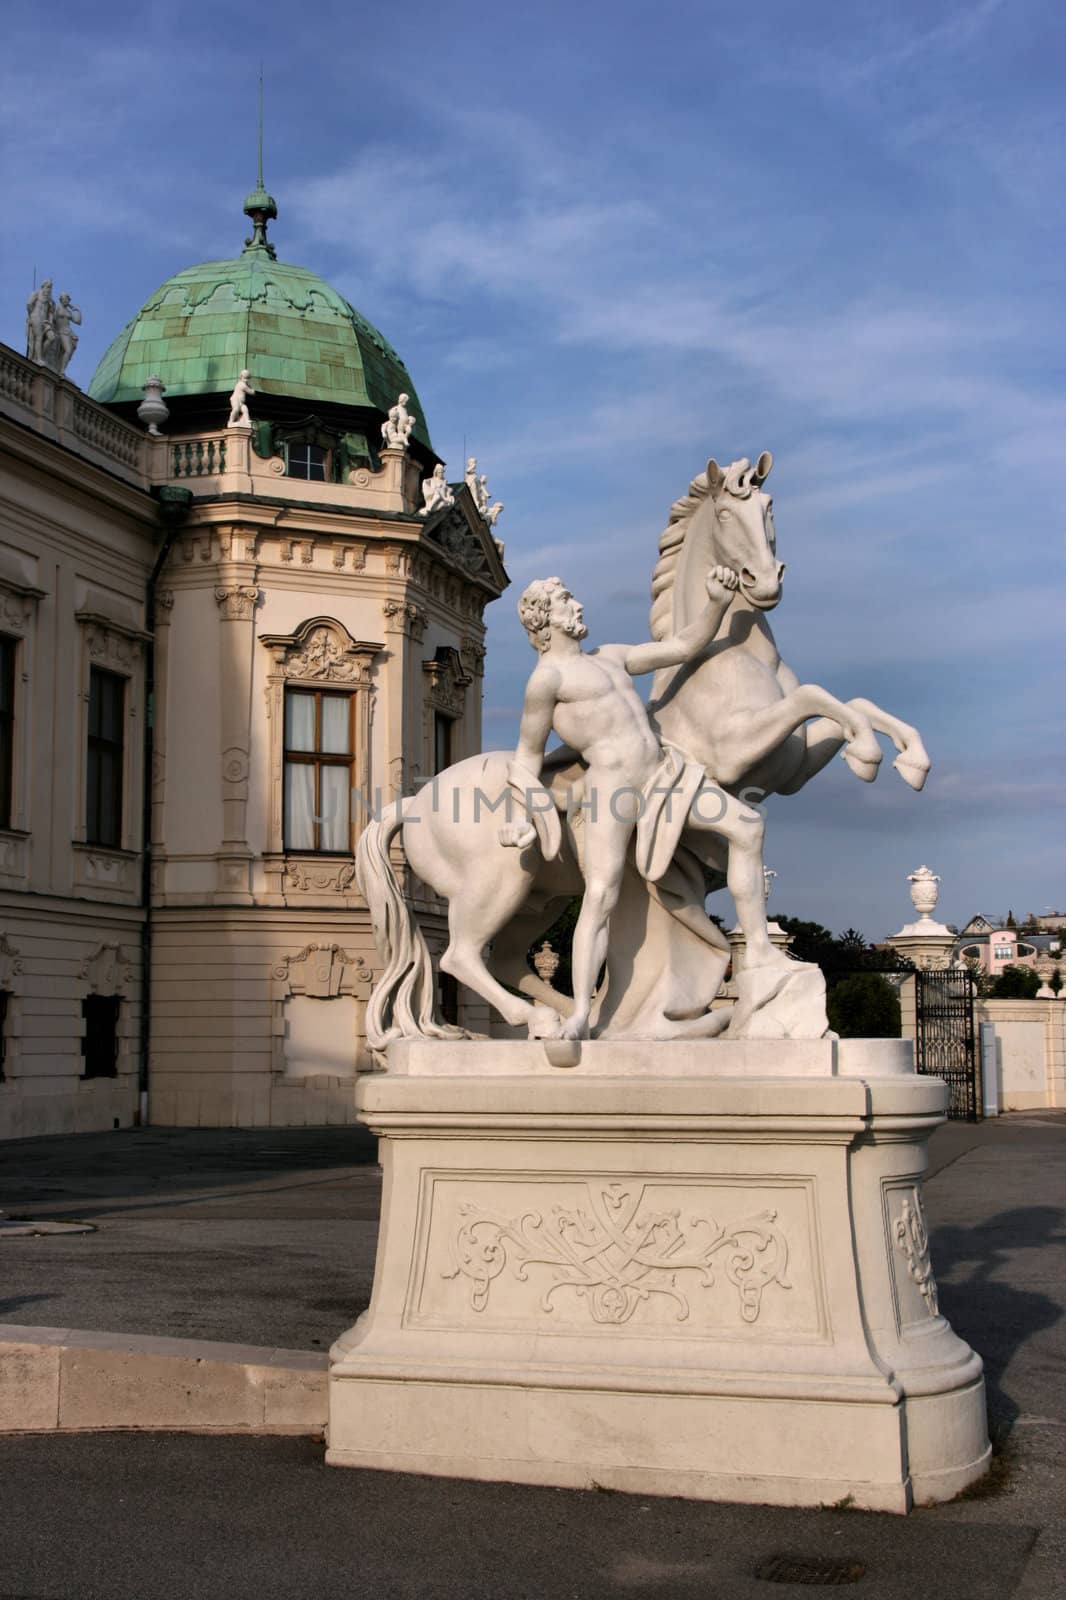 Statue of man with a horse next to Belvedere Castle in Vienna, Austria